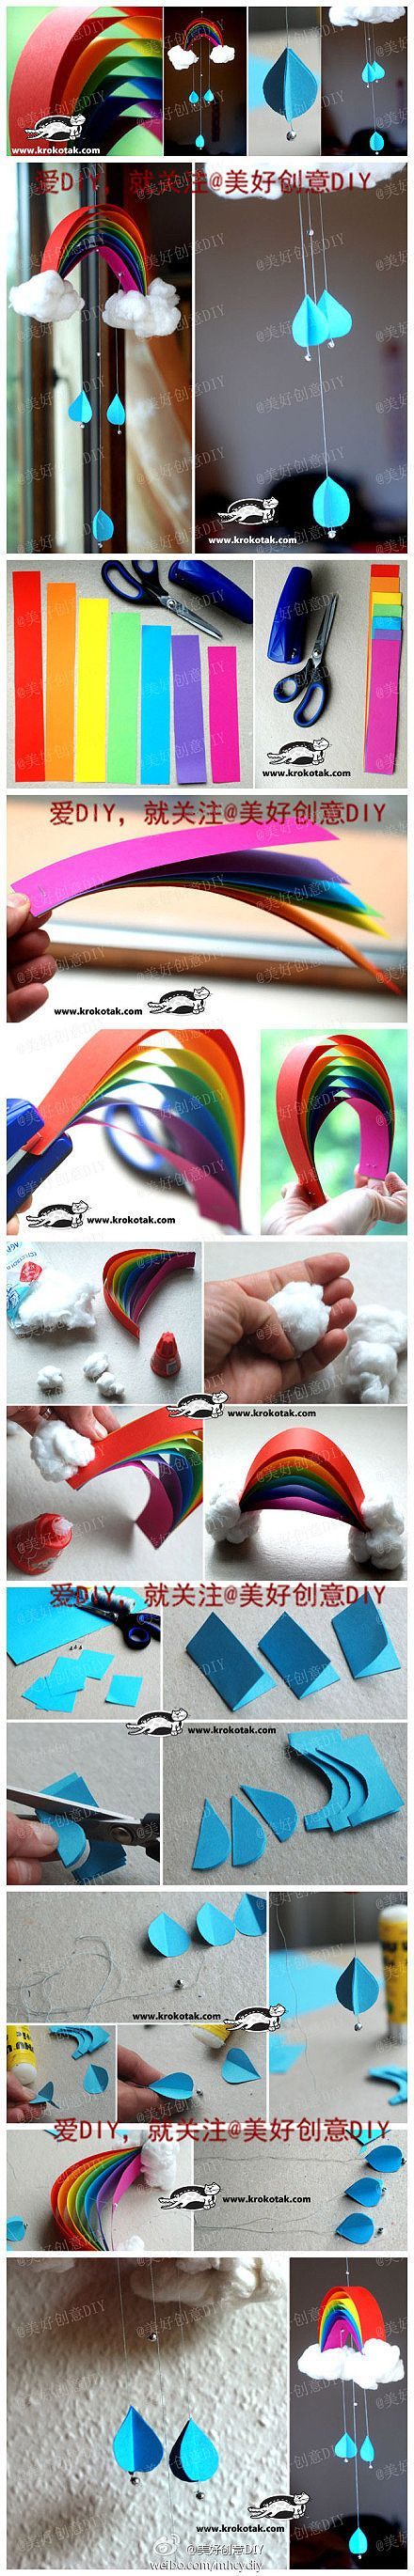 Paper Rainbows for a fun kid craft